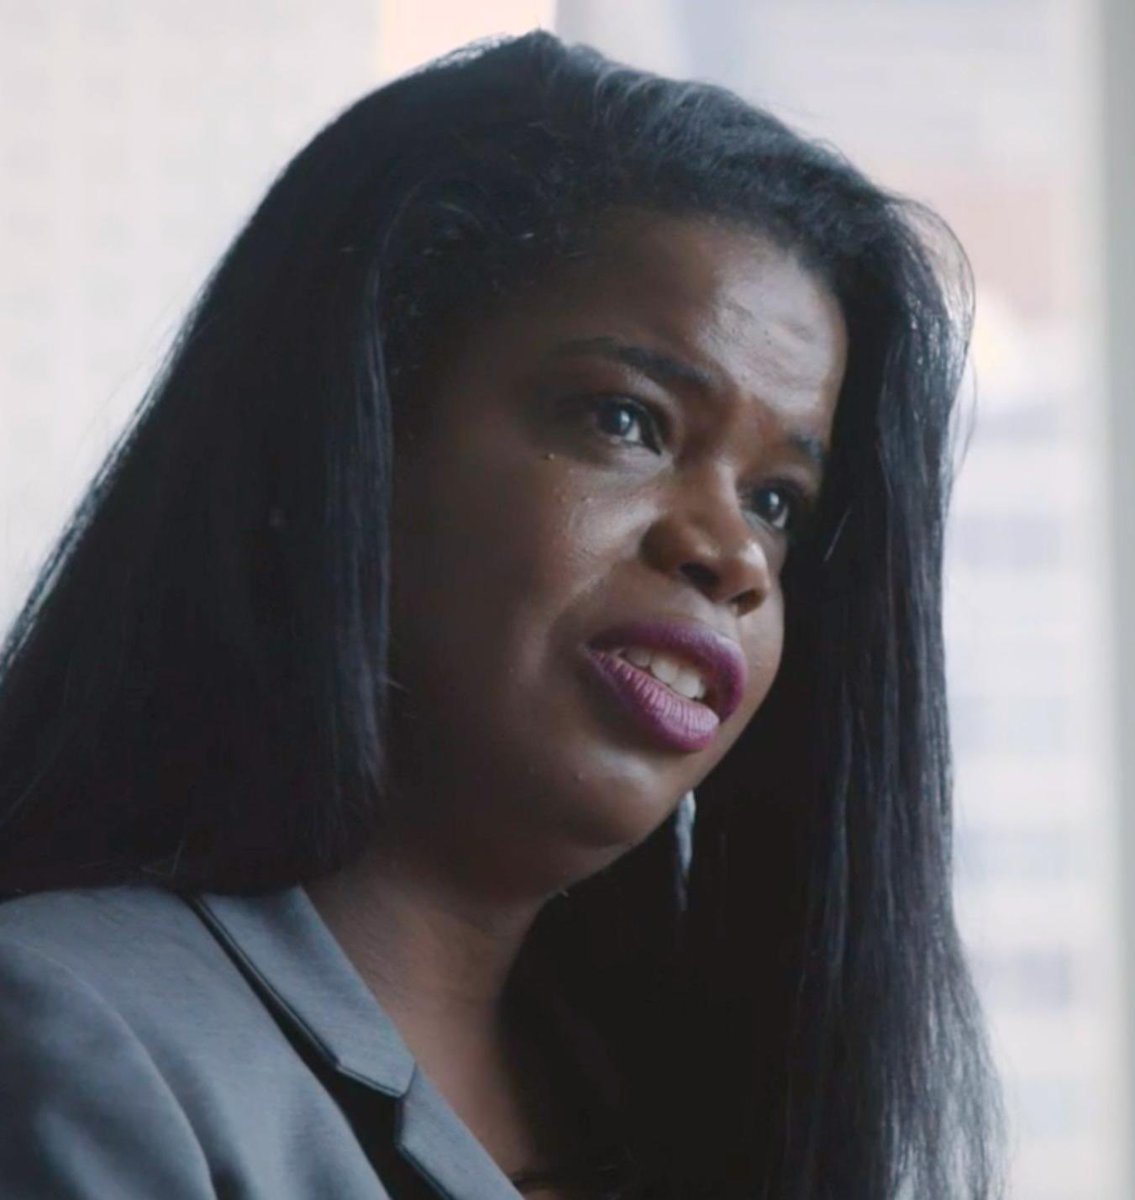 #RKelly attorney in 2019 asked for all the communication between #KimFoxx #MichaelAvenatti #JimDerogatis wonder did they ever get it?Why would these 3 be in close communication DAYS prior to him being arrested and charged? #FreeRKelly #Corrruption https://t.co/WeB8ywMotx https://t.co/TSudPZLVZ5